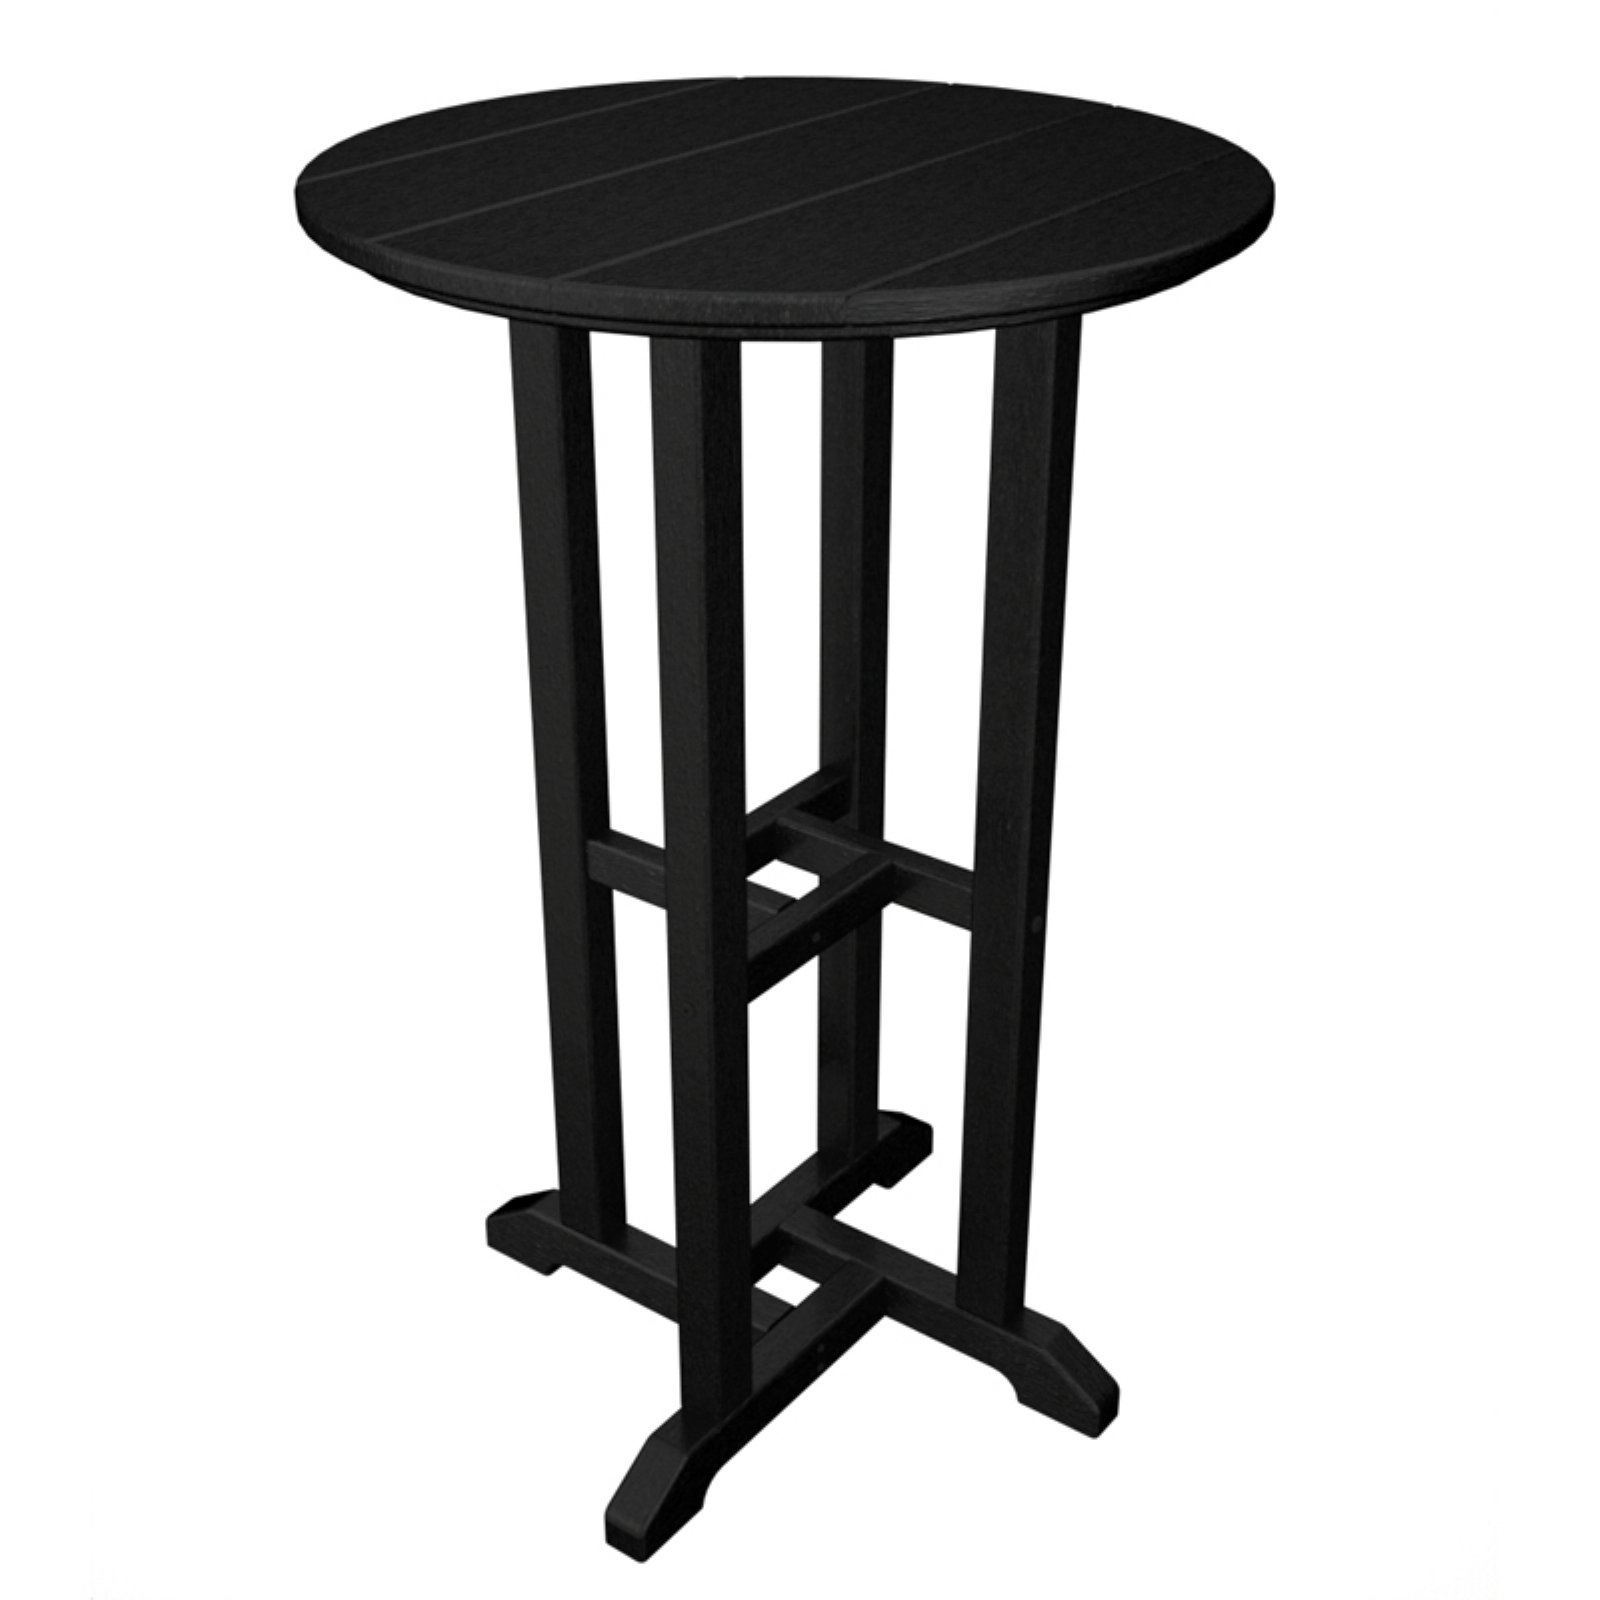 POLYWOOD&reg; Traditional 24 in. Round Counter Height Table - image 1 of 2